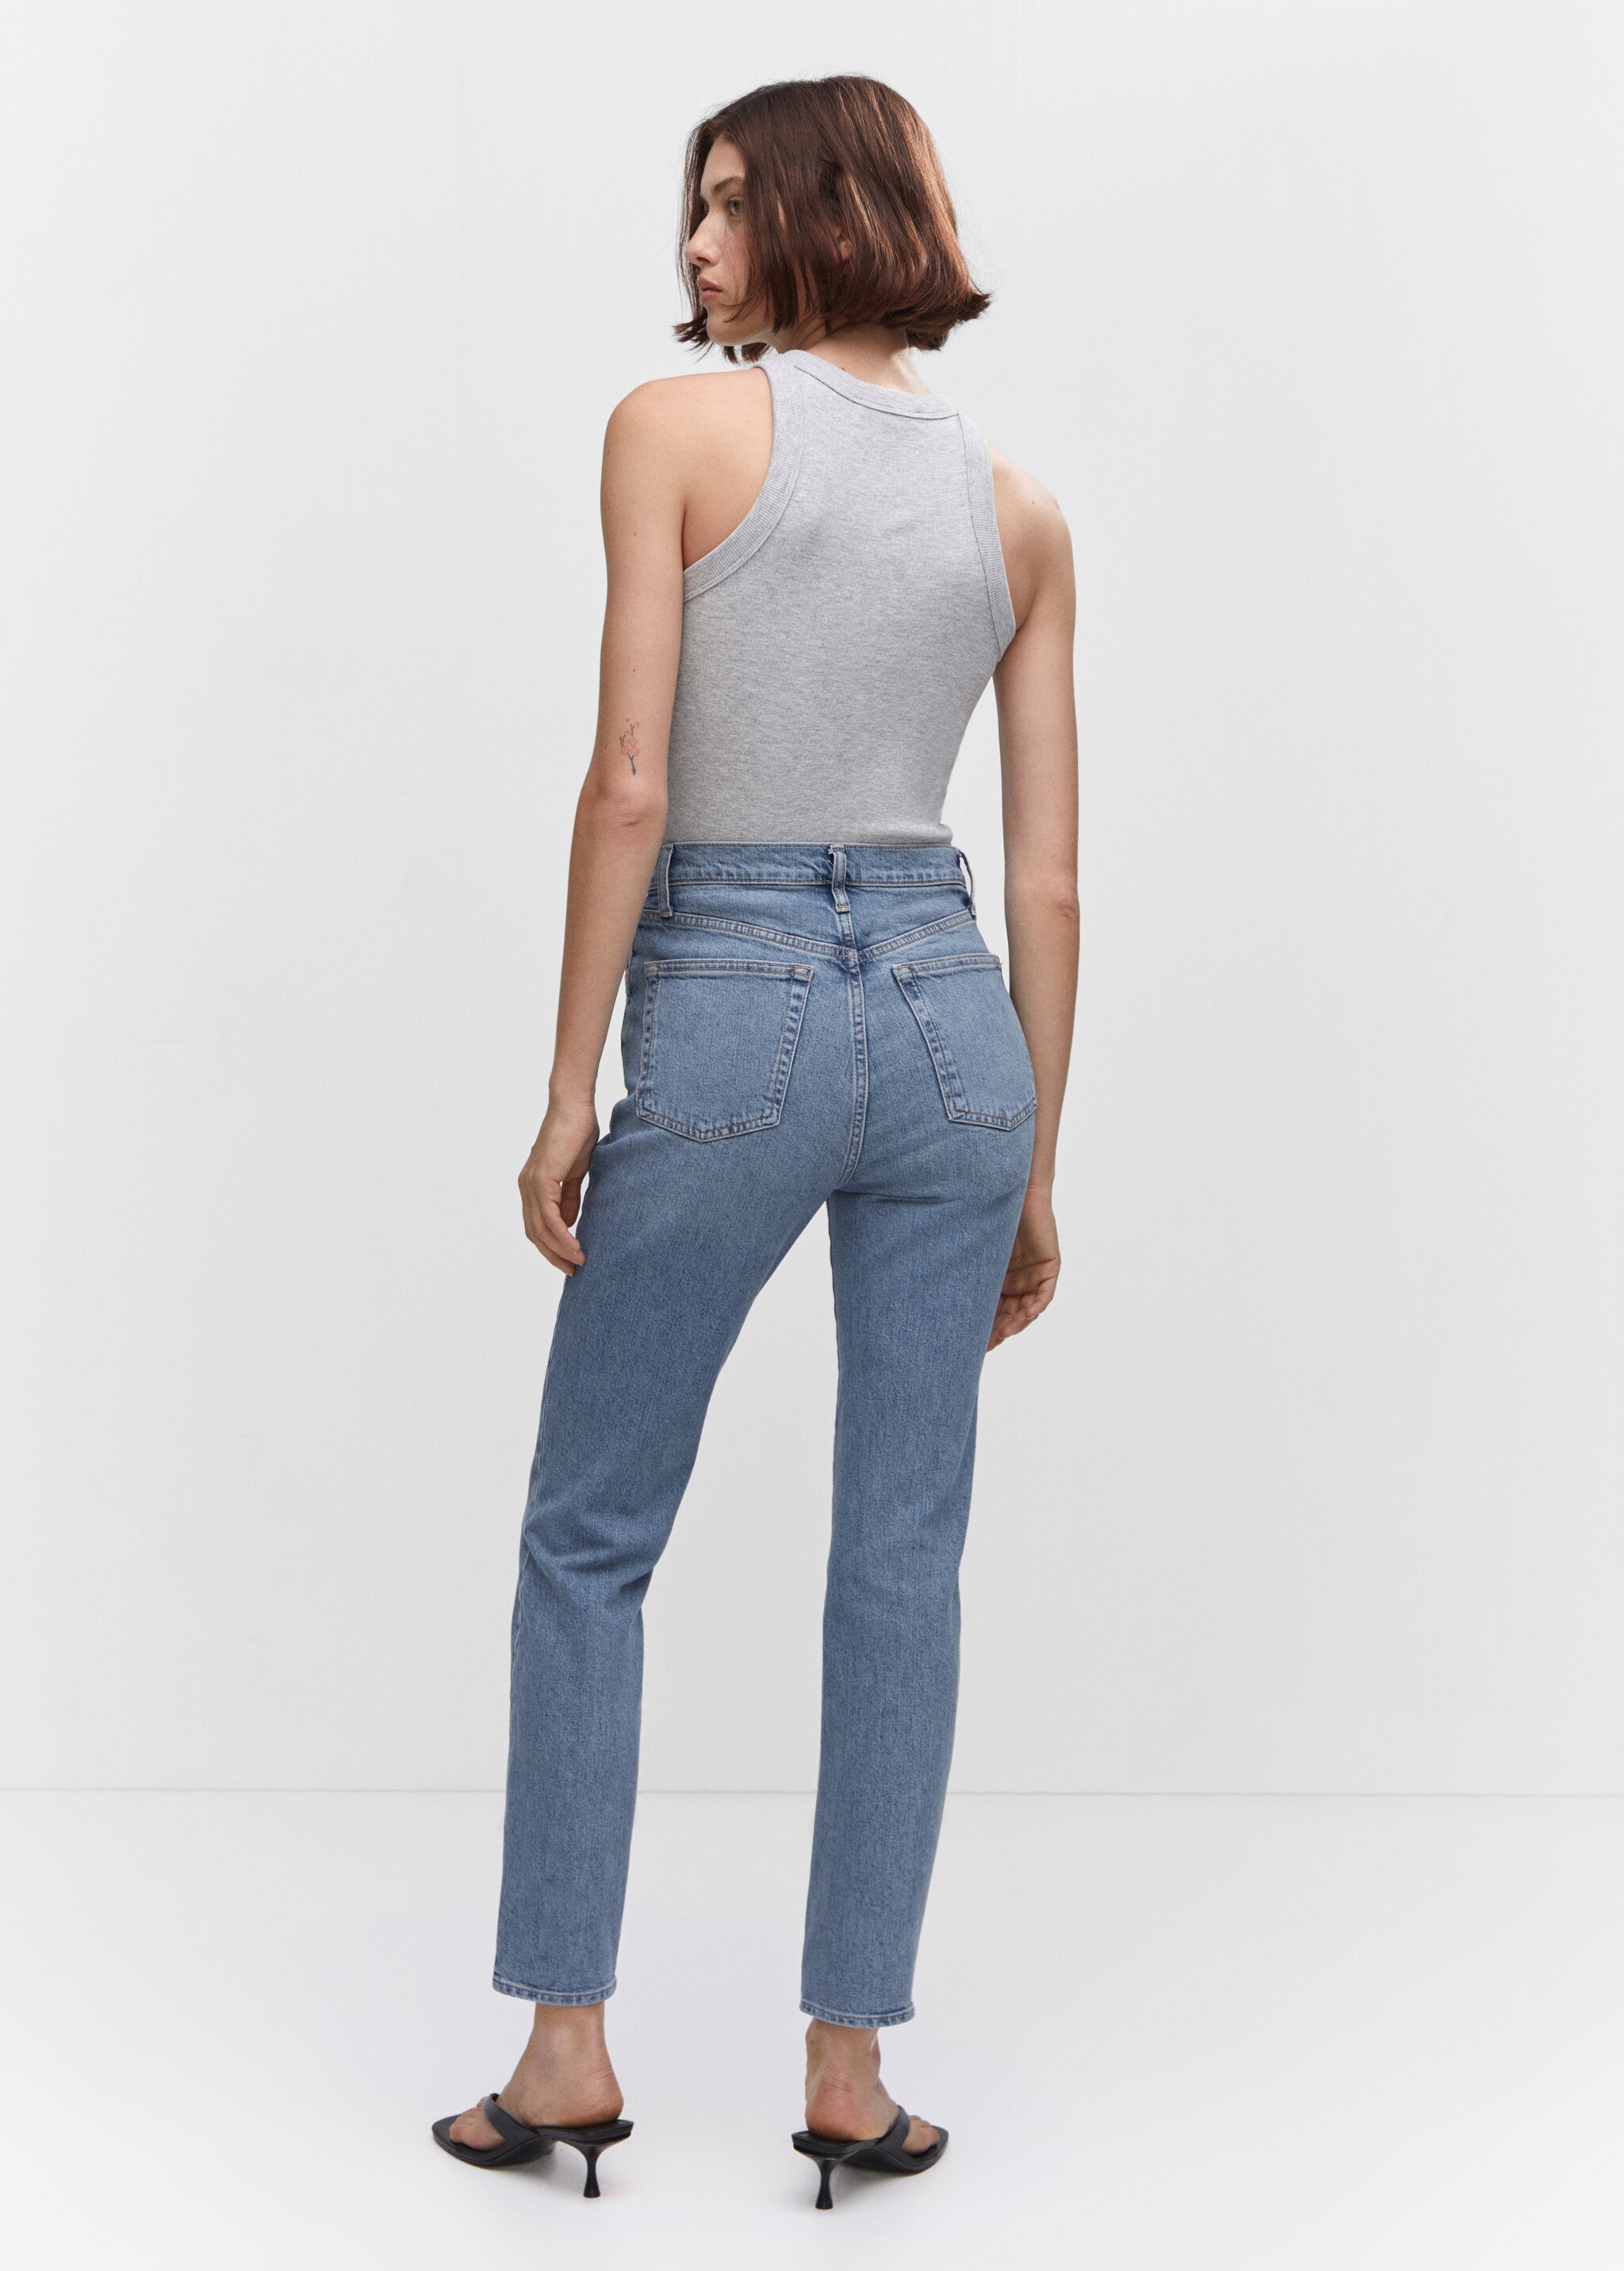 Slim cropped jeans - Reverse of the article